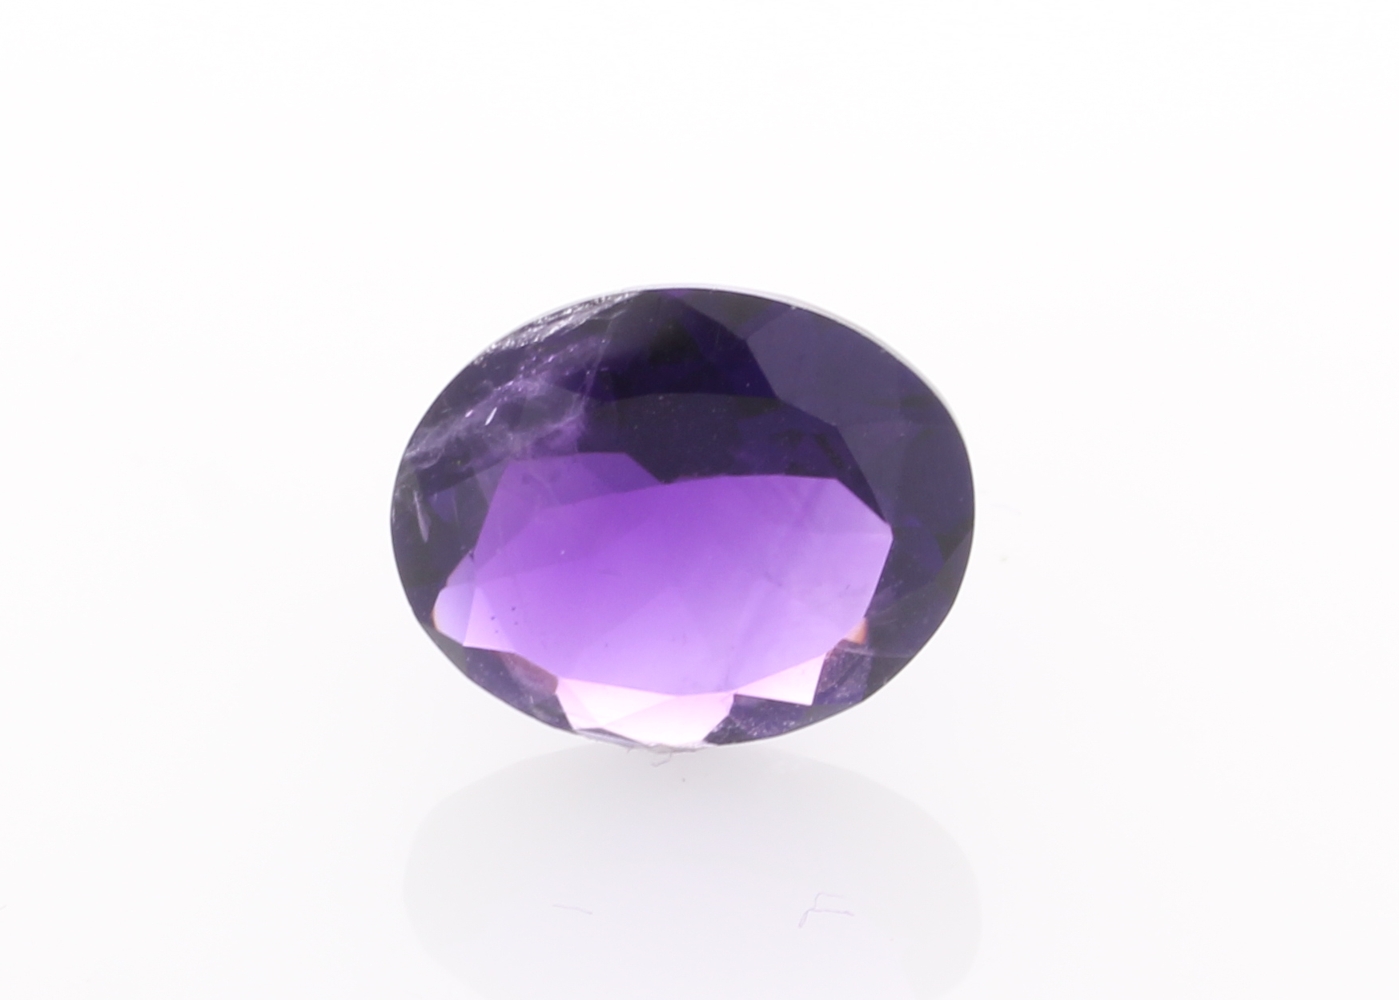 Loose Oval Amethyst 5.45 Carats - Image 2 of 2